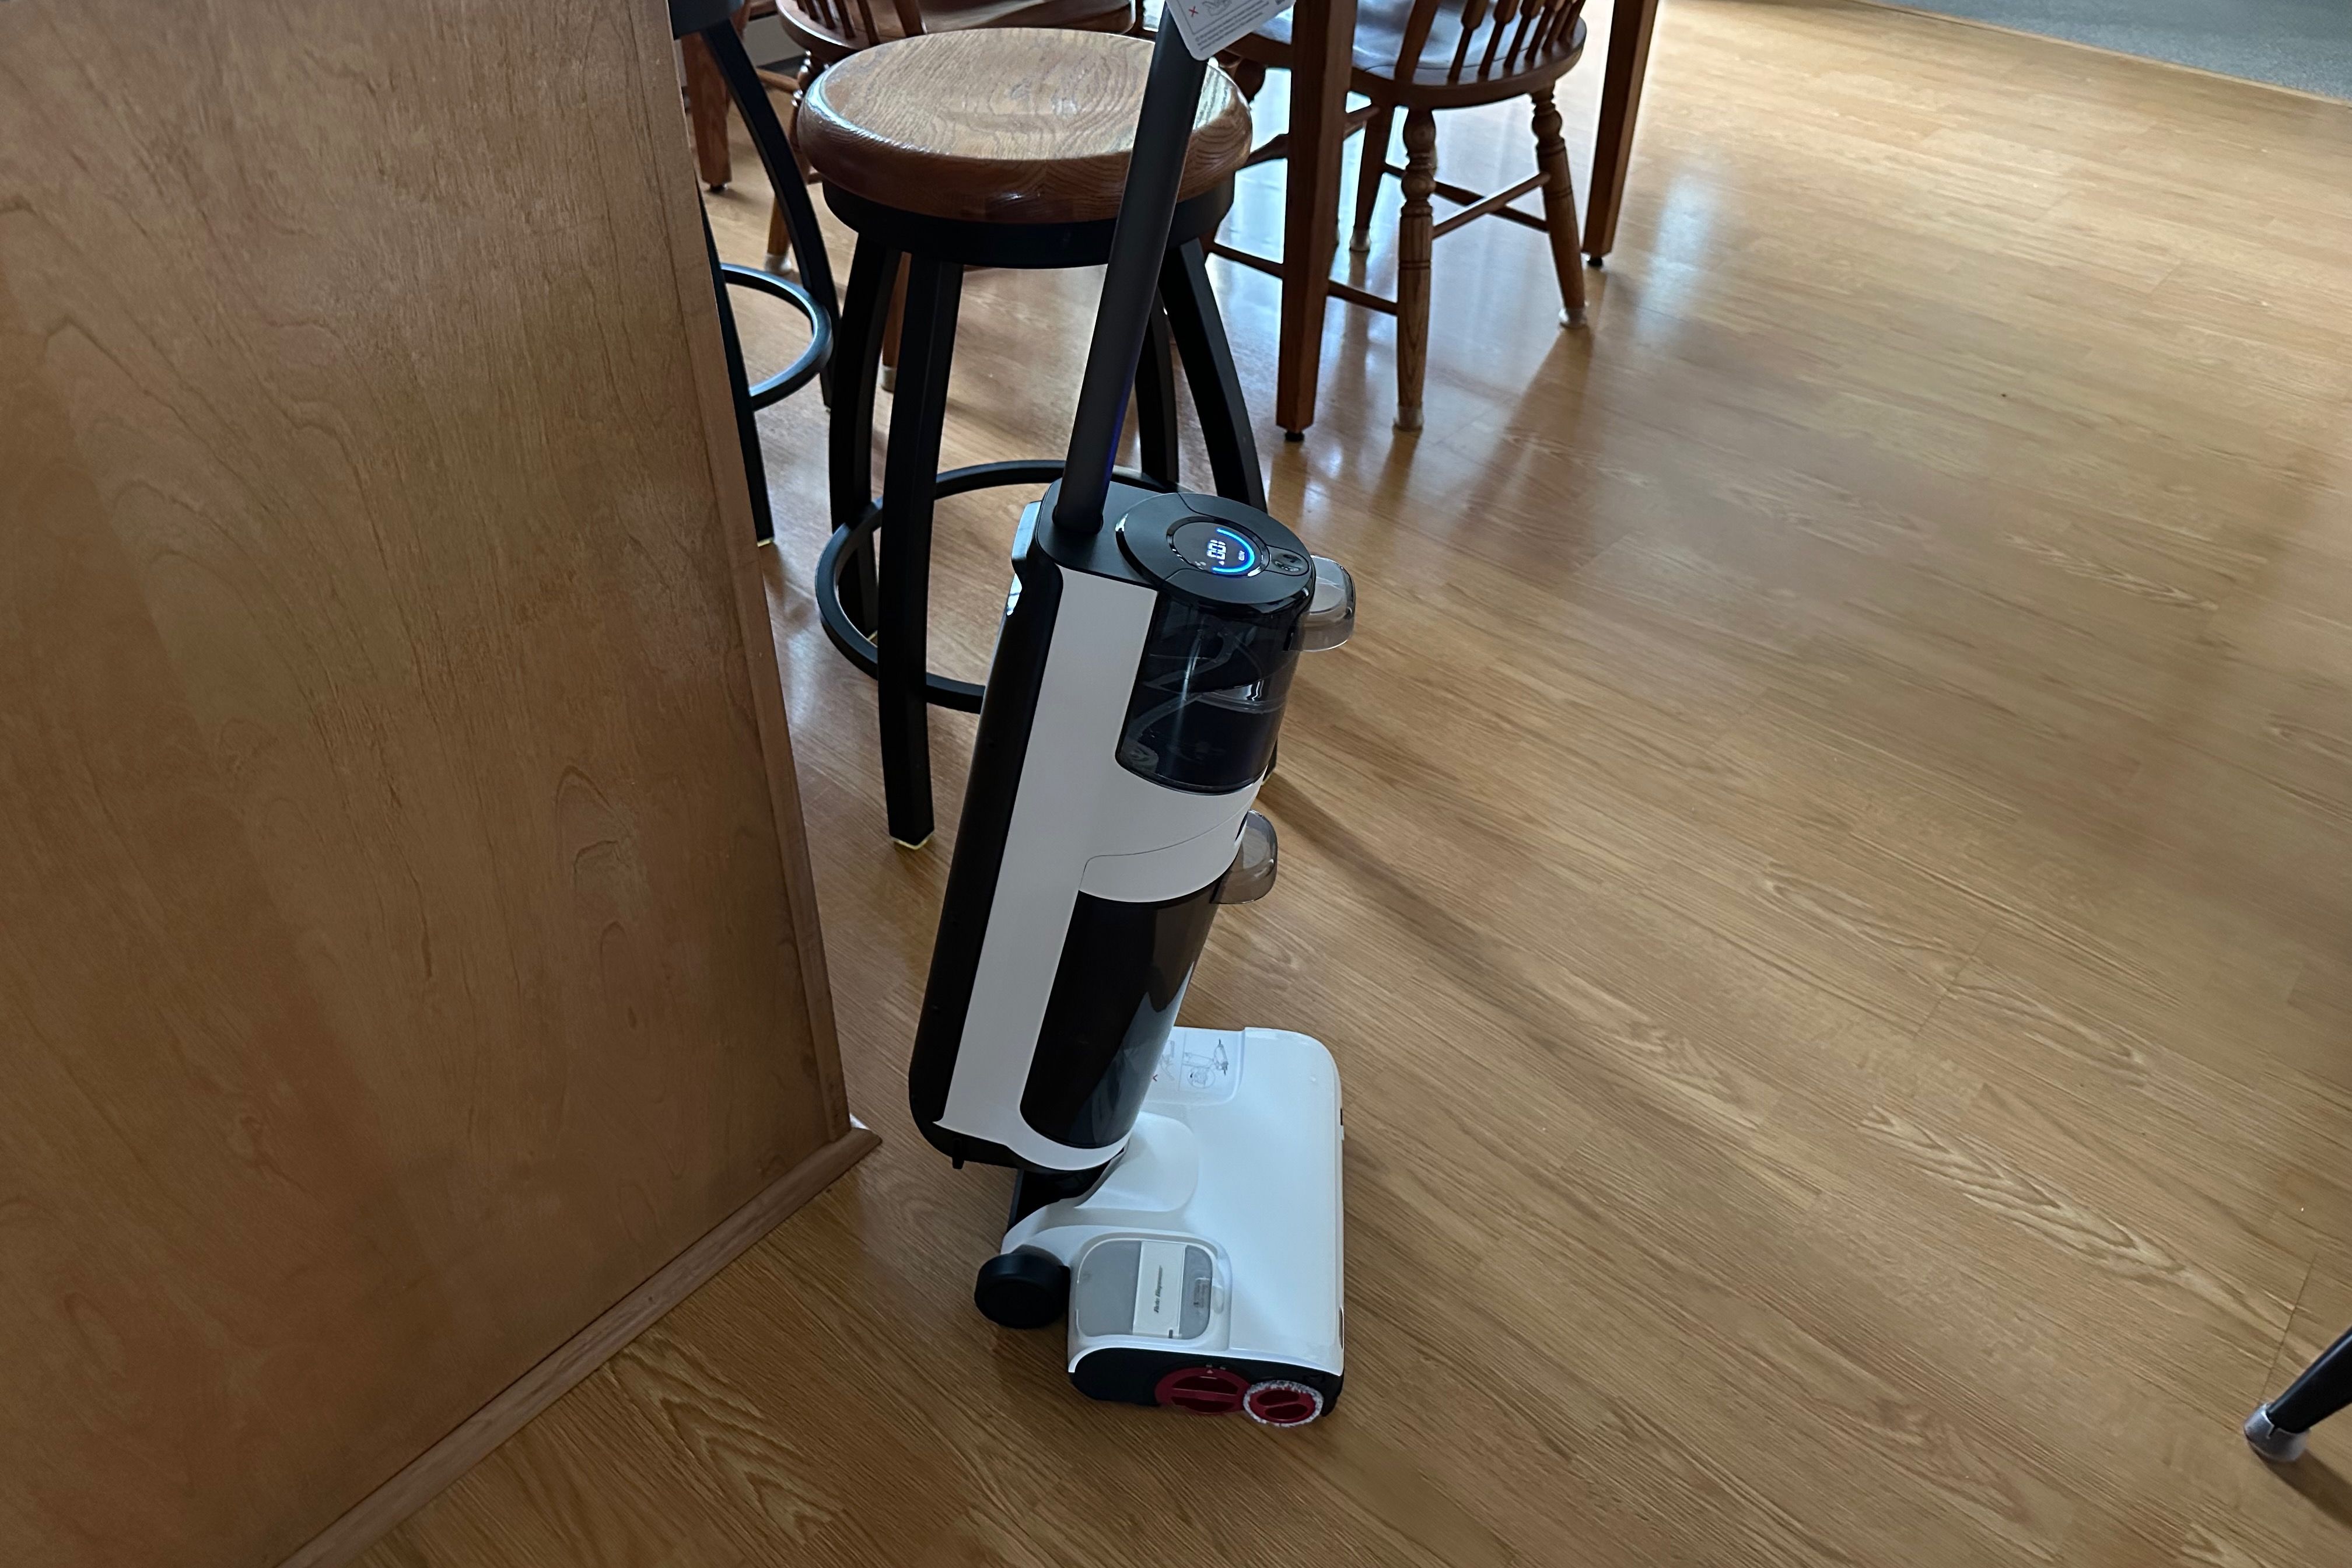 A Roborock Dyad Pro shown in a kitchen on a hardwood floor